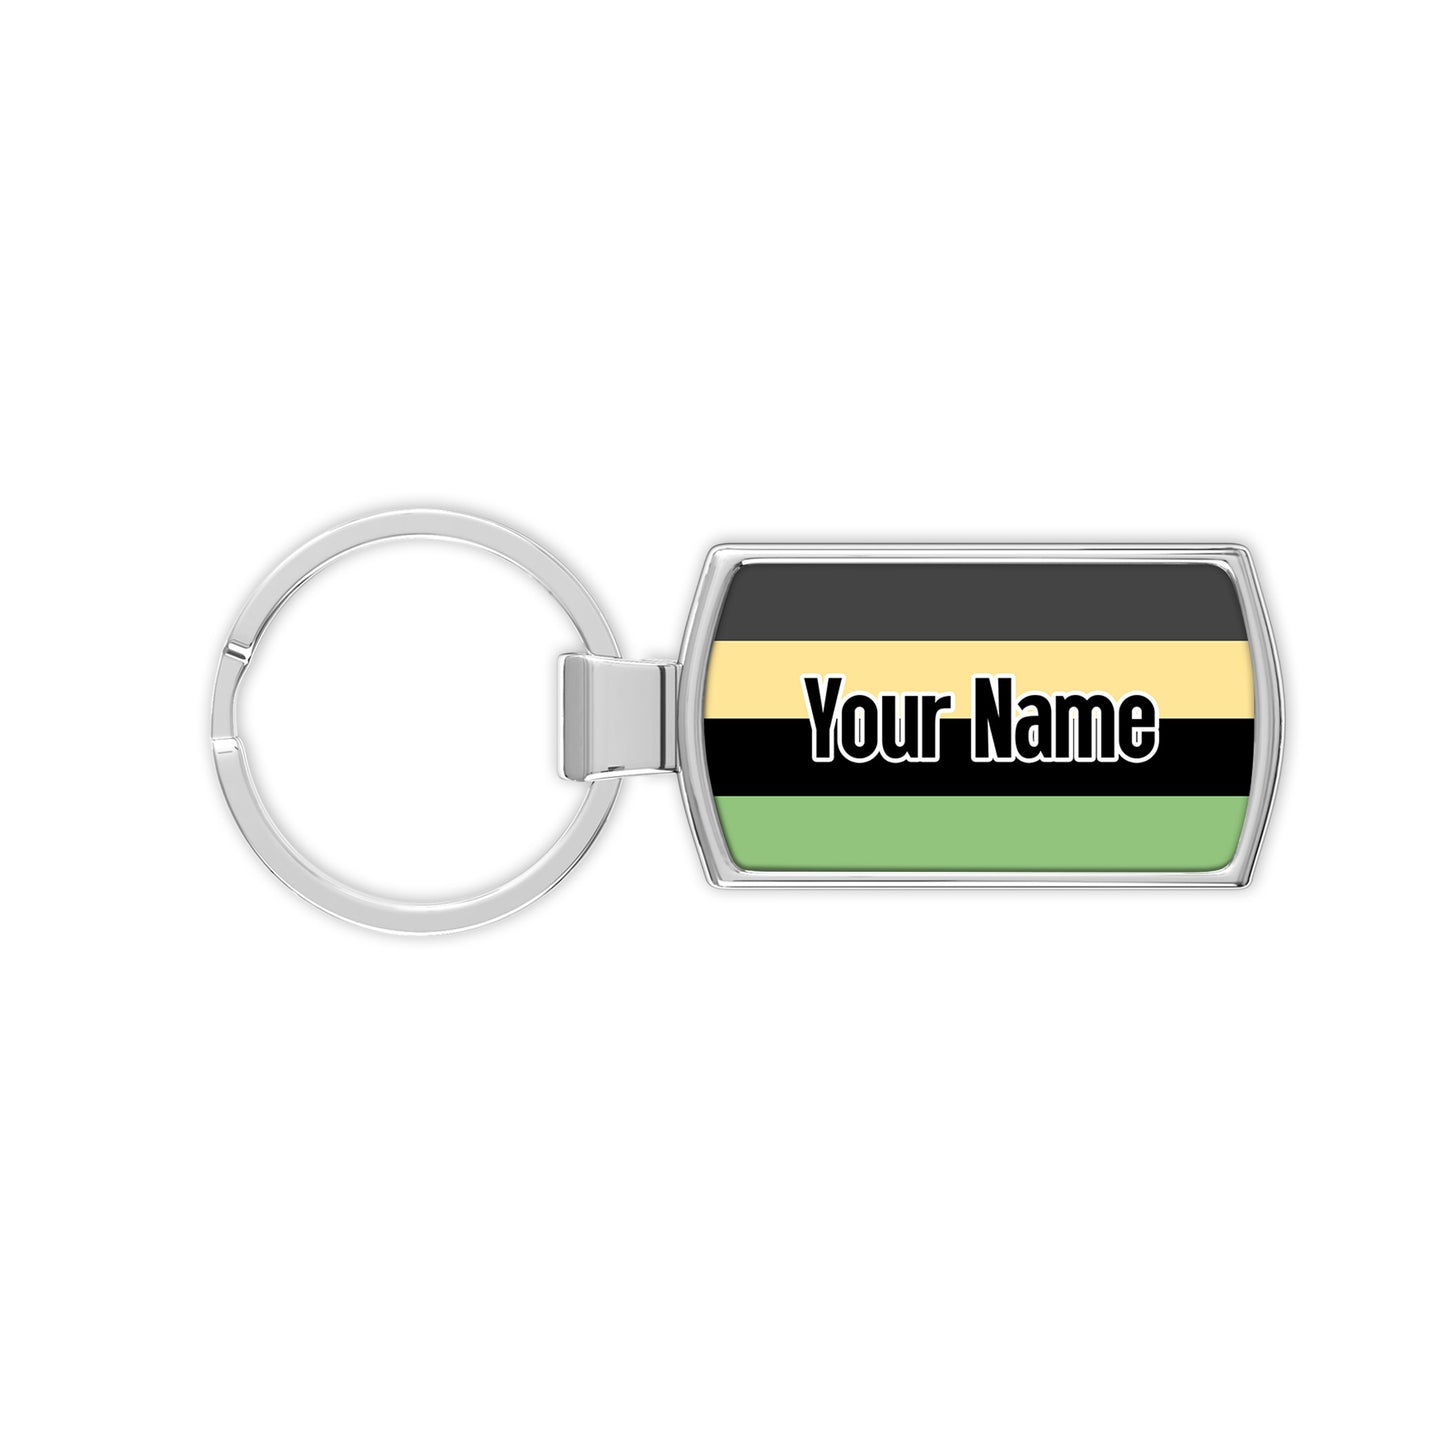 Orchidromantic pride flag metal keyring personalised with your name